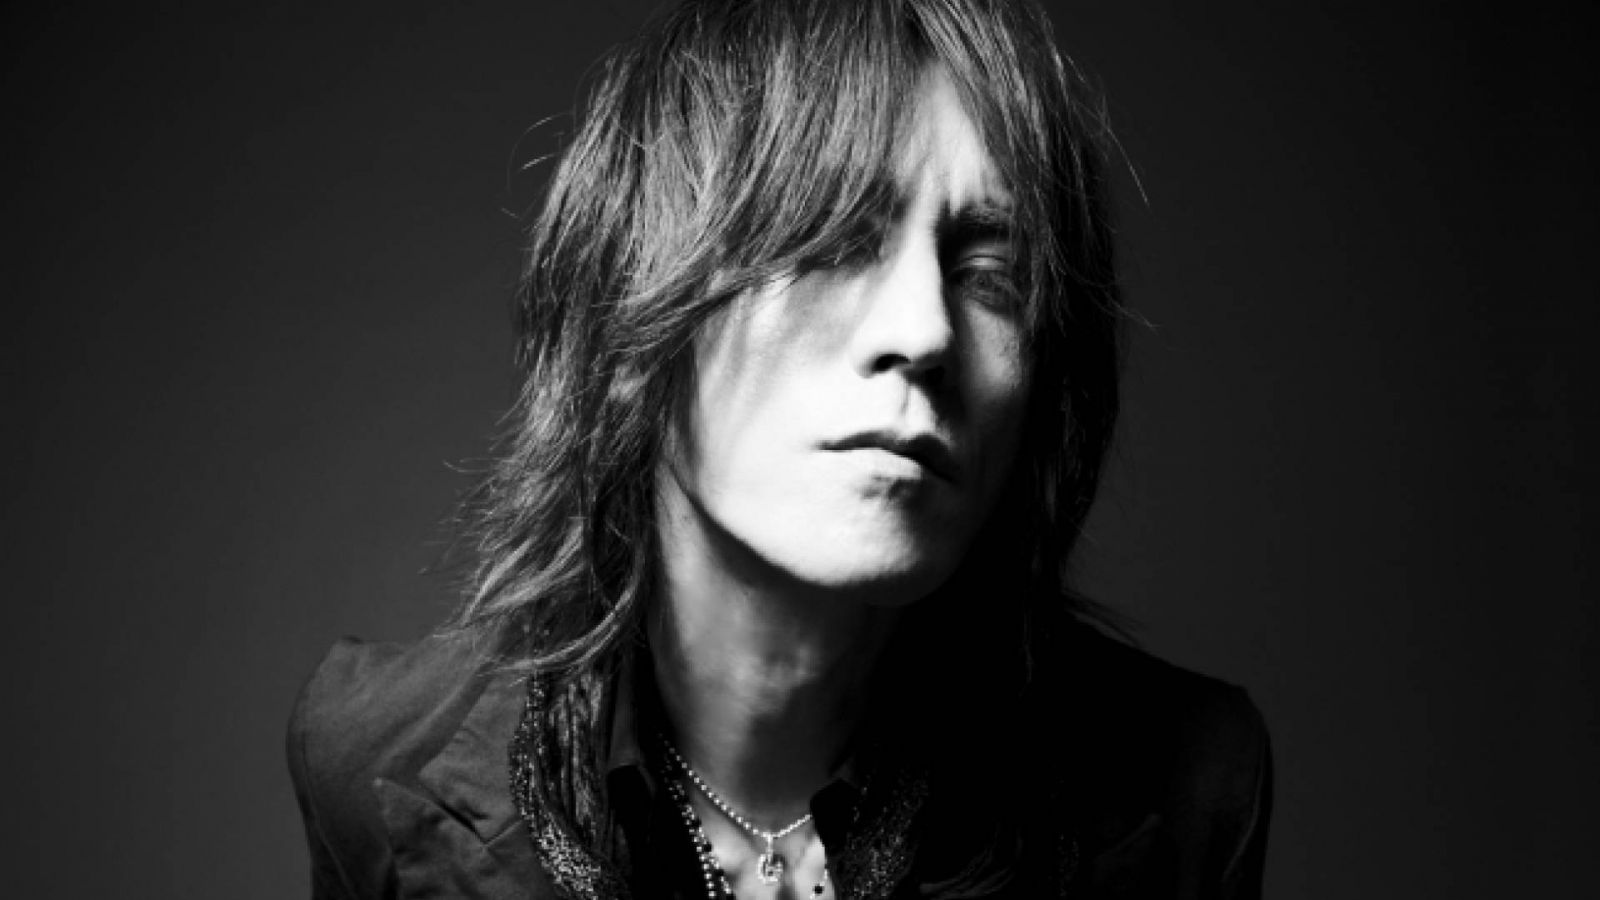 Stepping up the STAIRWAY TO FLOWER OF LIFE with SUGIZO in Taipei © SUGIZO